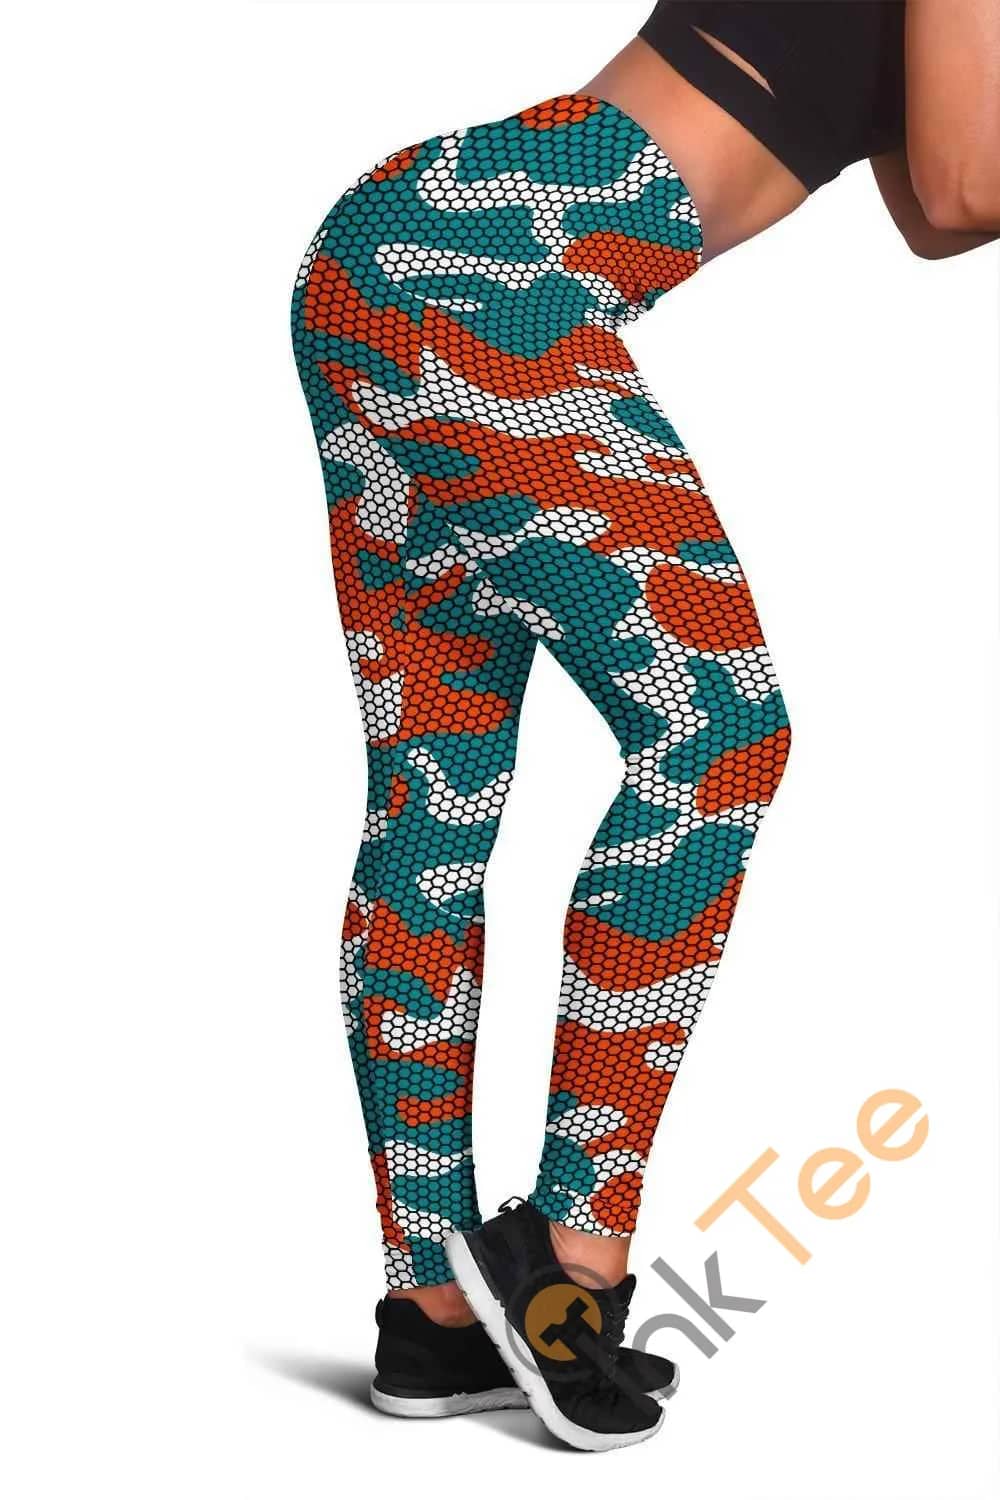 Miami Dolphins Inspired Hex Camo 3D All Over Print For Yoga Fitness Fashion Women's Leggings